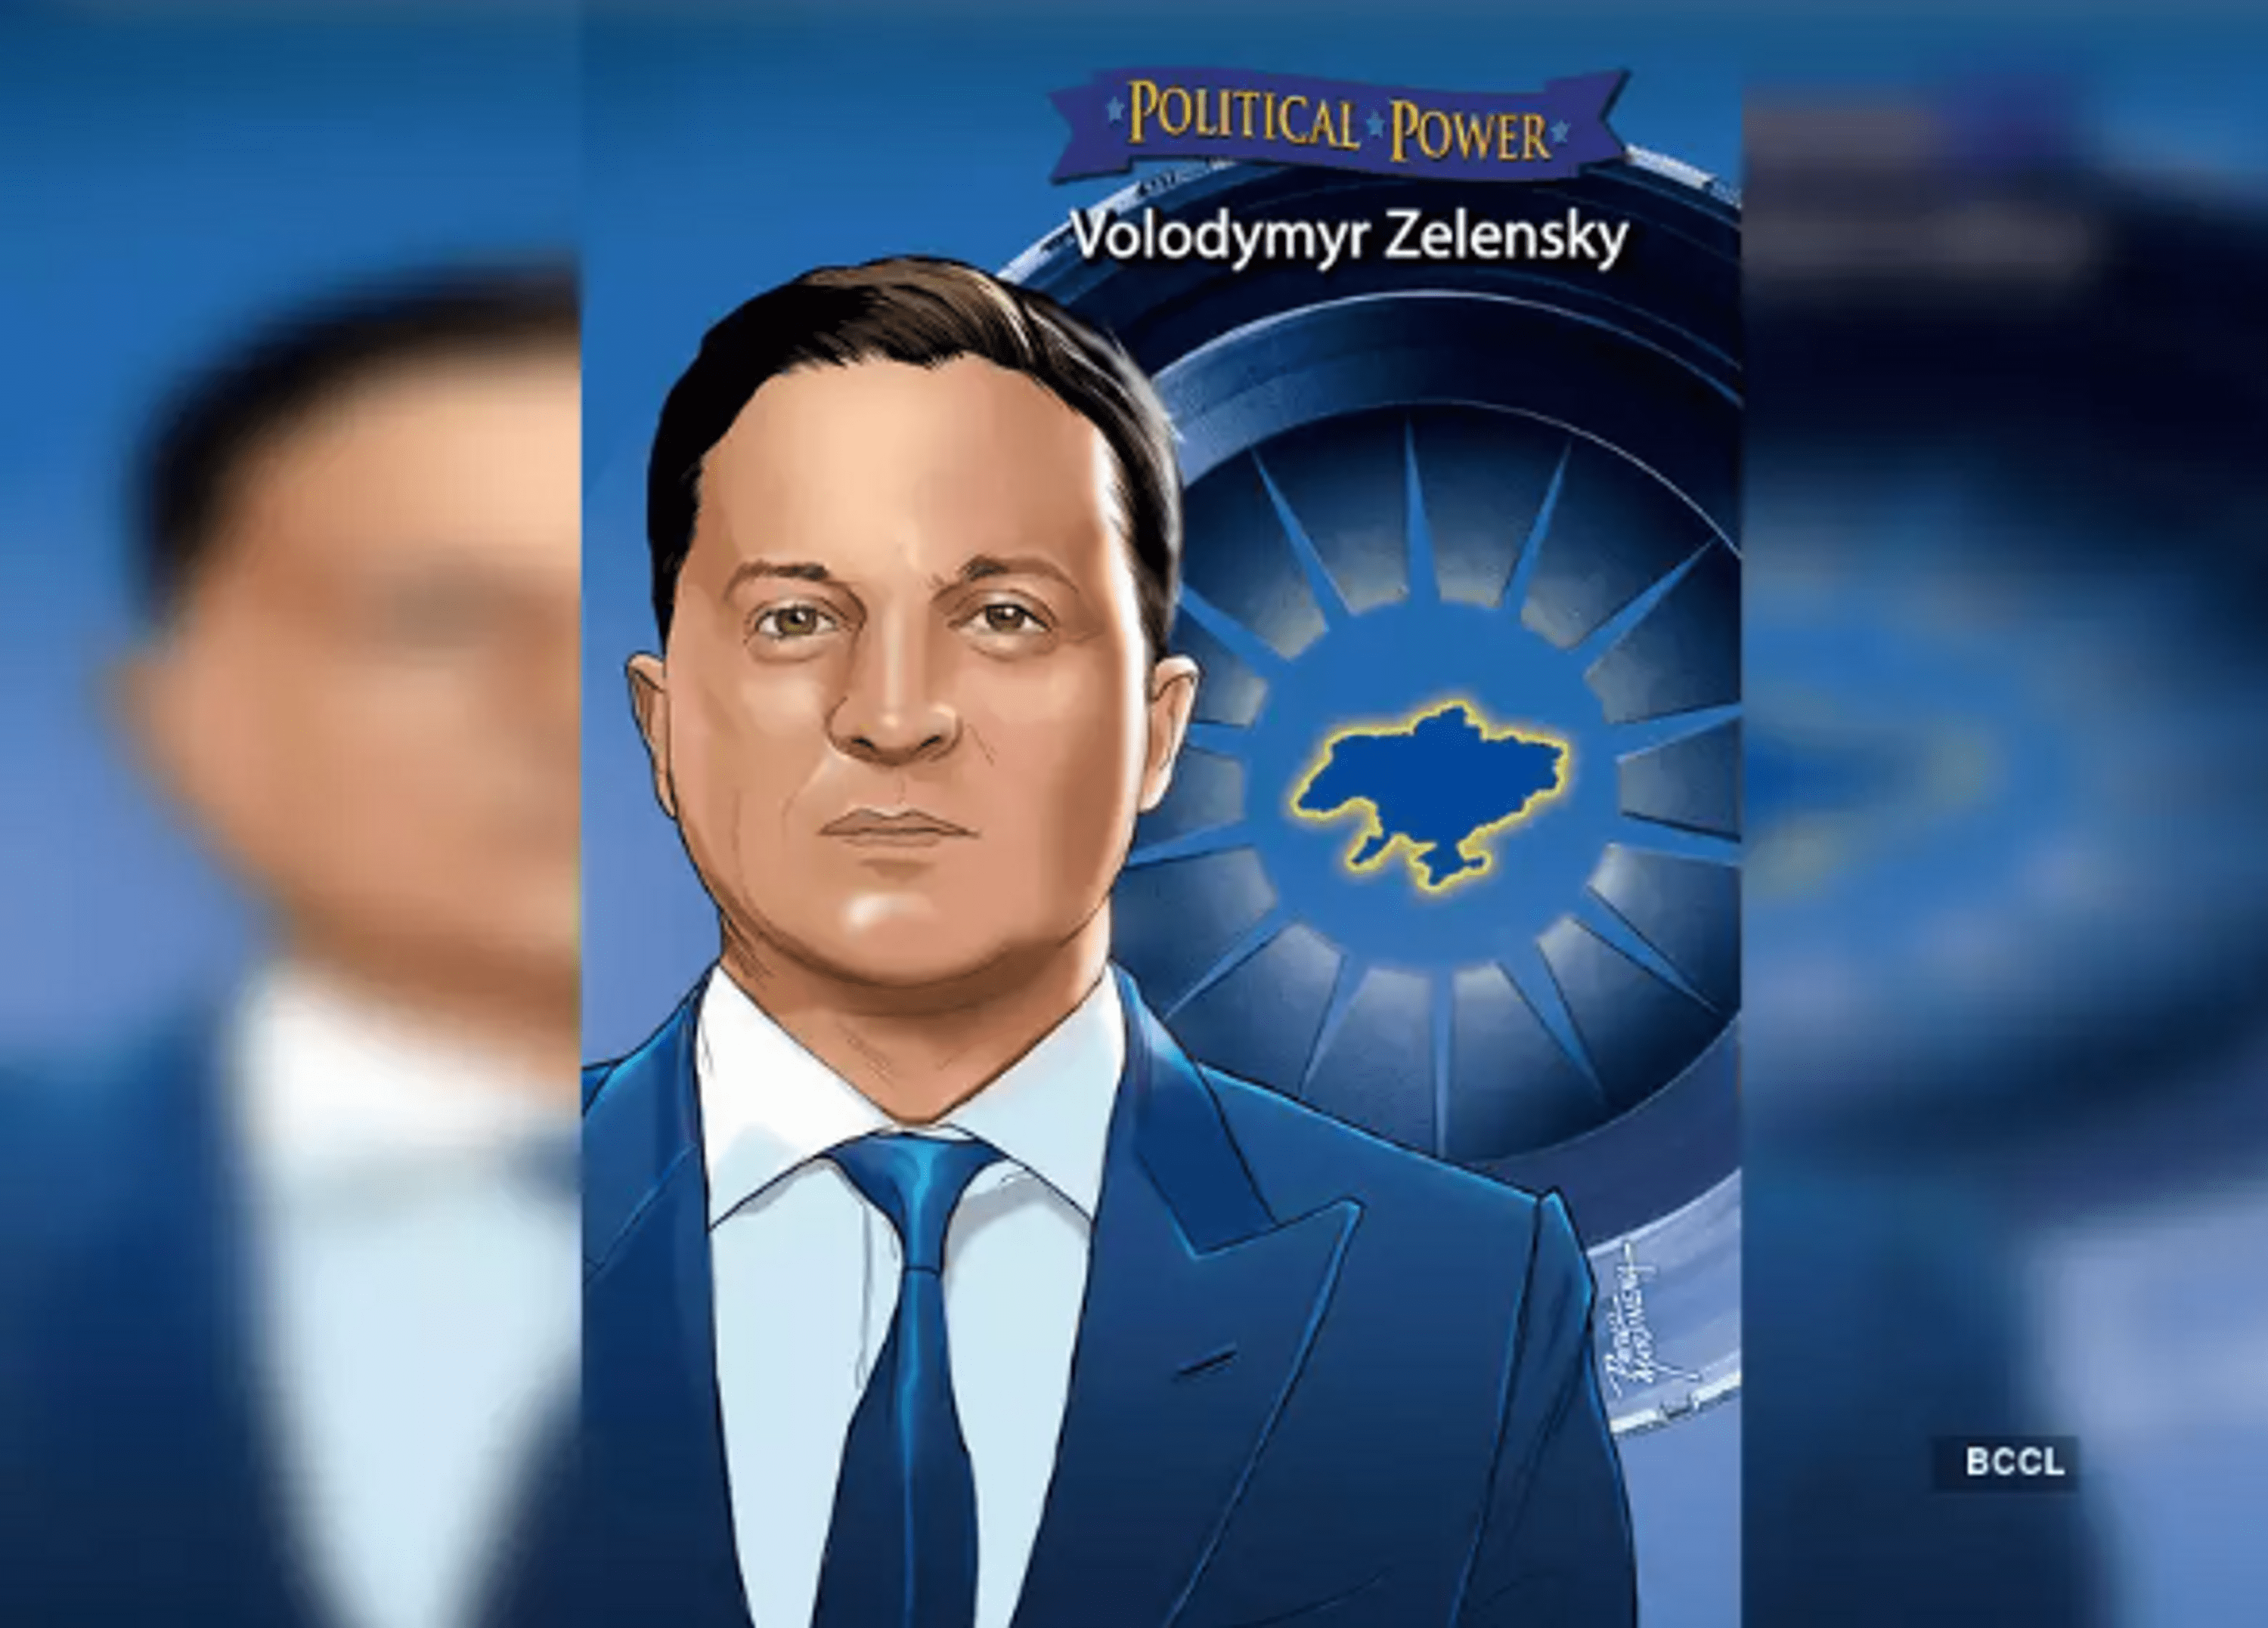 A comic book about the life of Ukrainian President Volodymyr Zelenskyy has been released